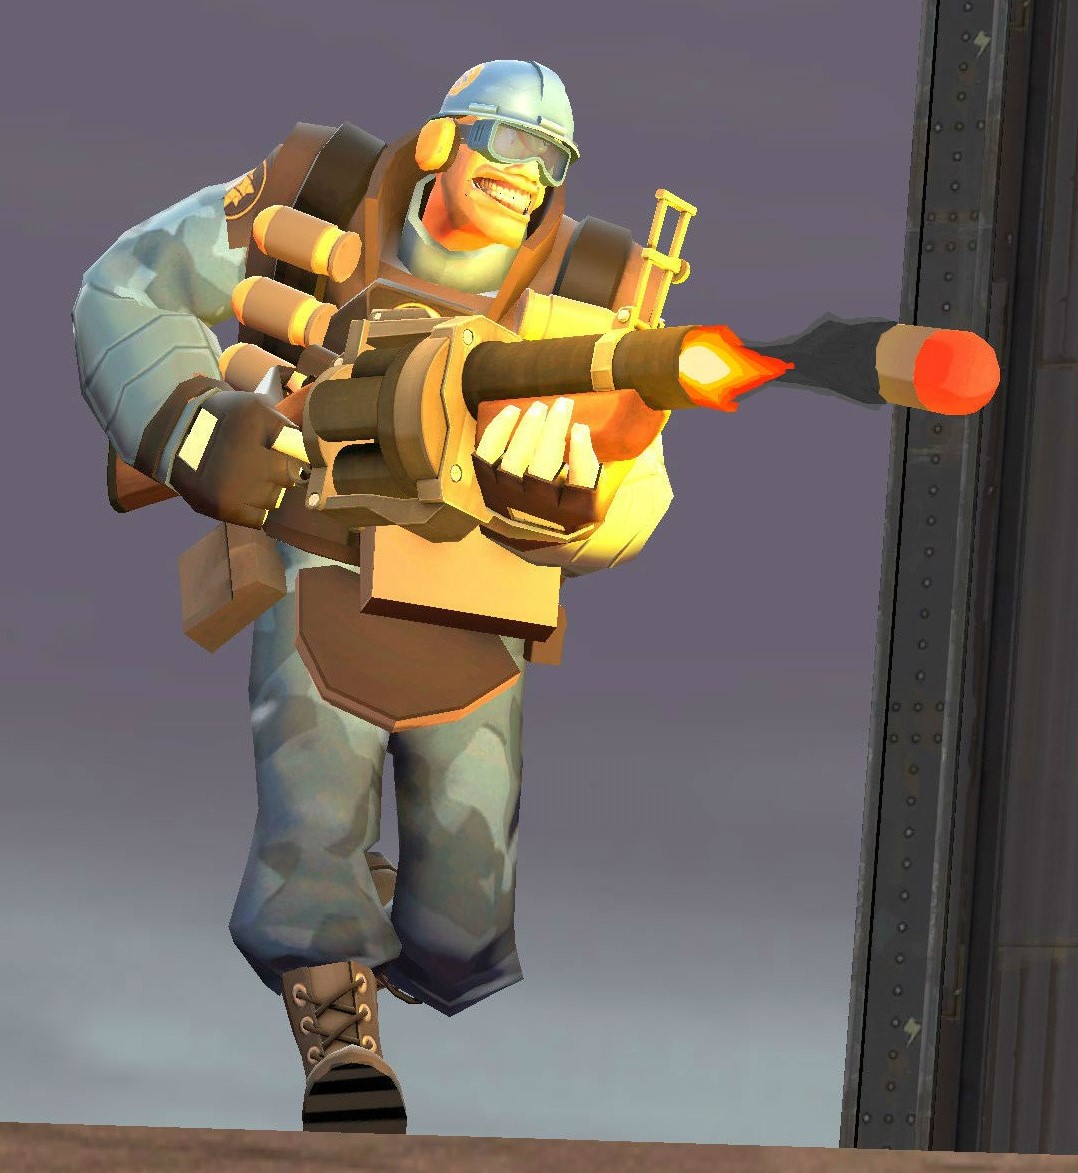 when did team fortress 2 come out